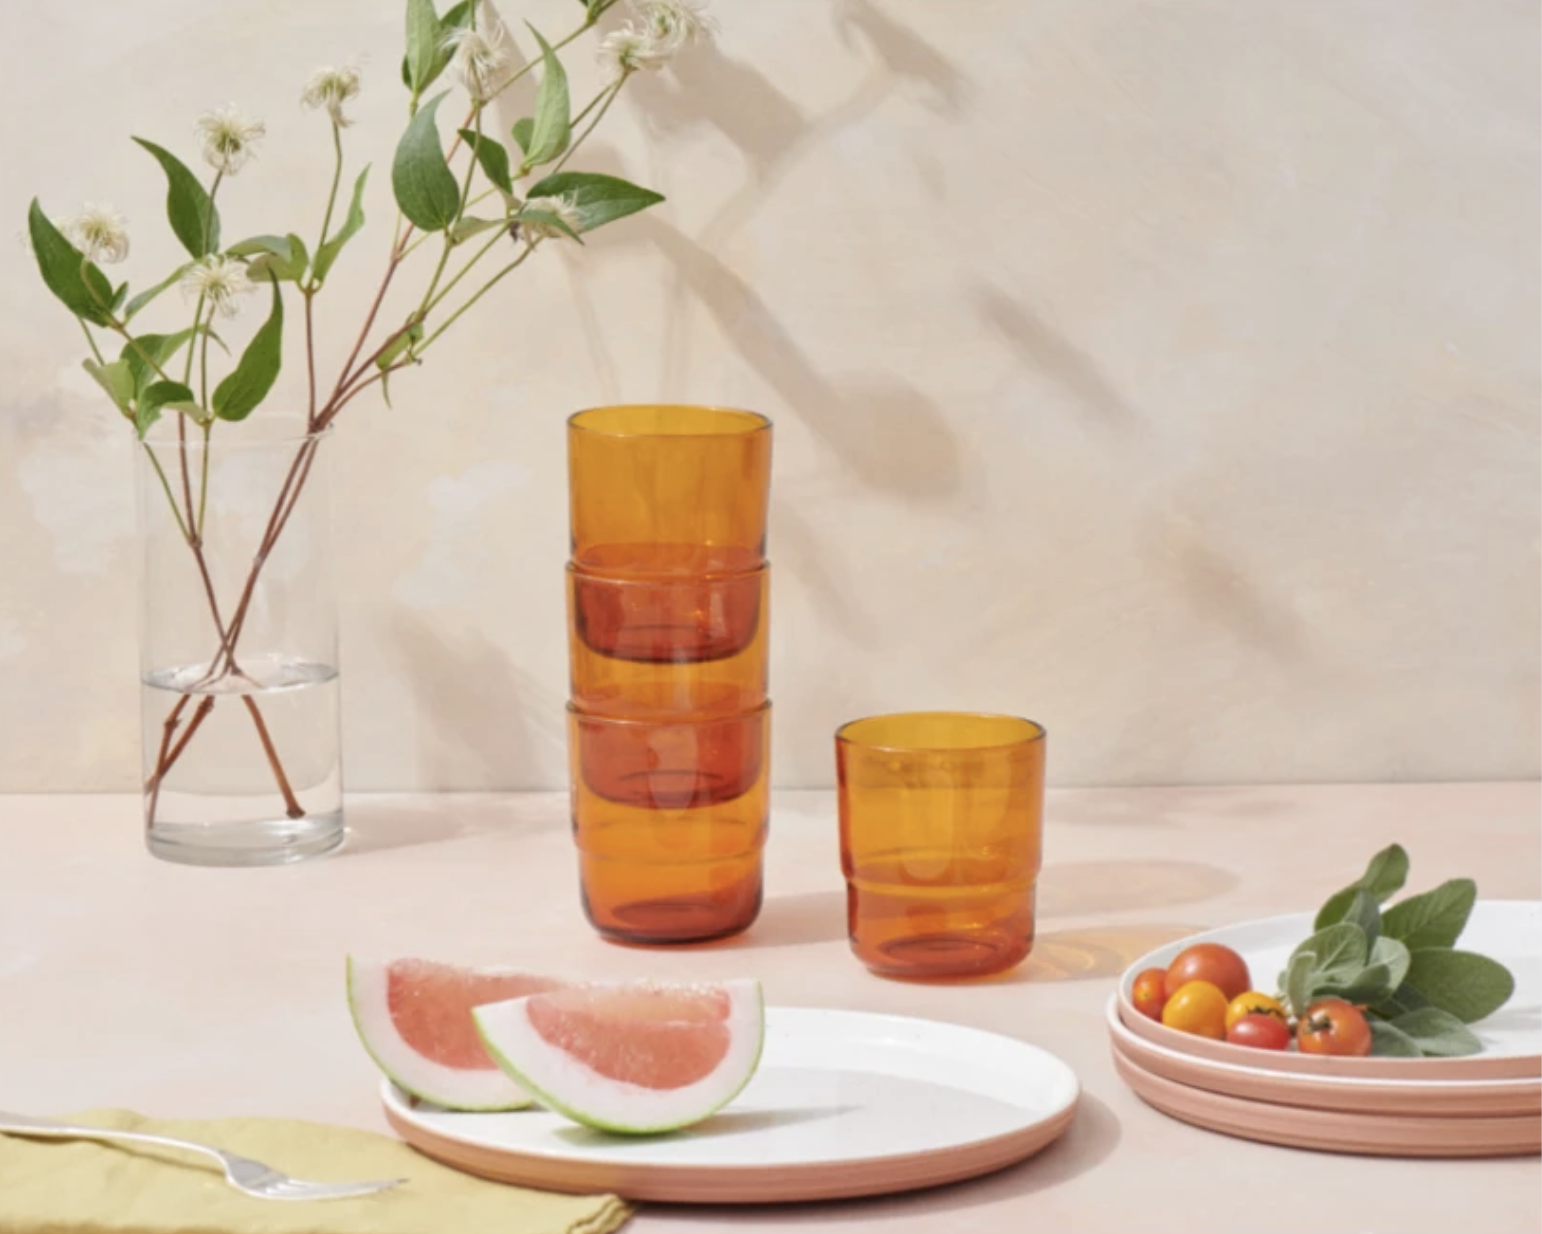 The drinking glasses on a table with plates of fruit in front of them